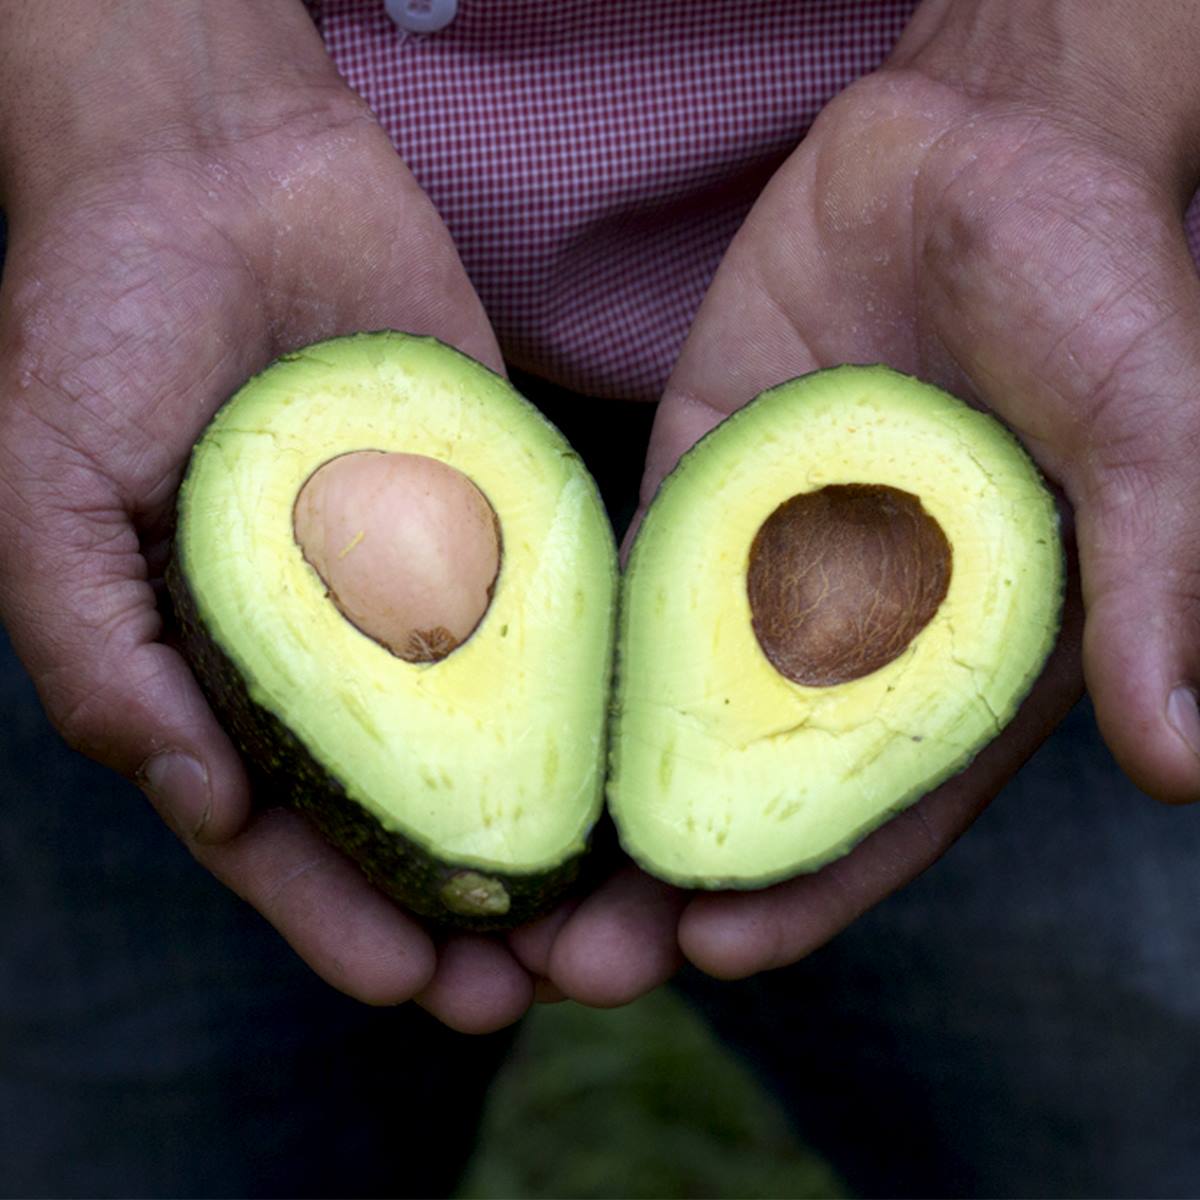 Mexico consolidates position as world’s largest avocado exporter